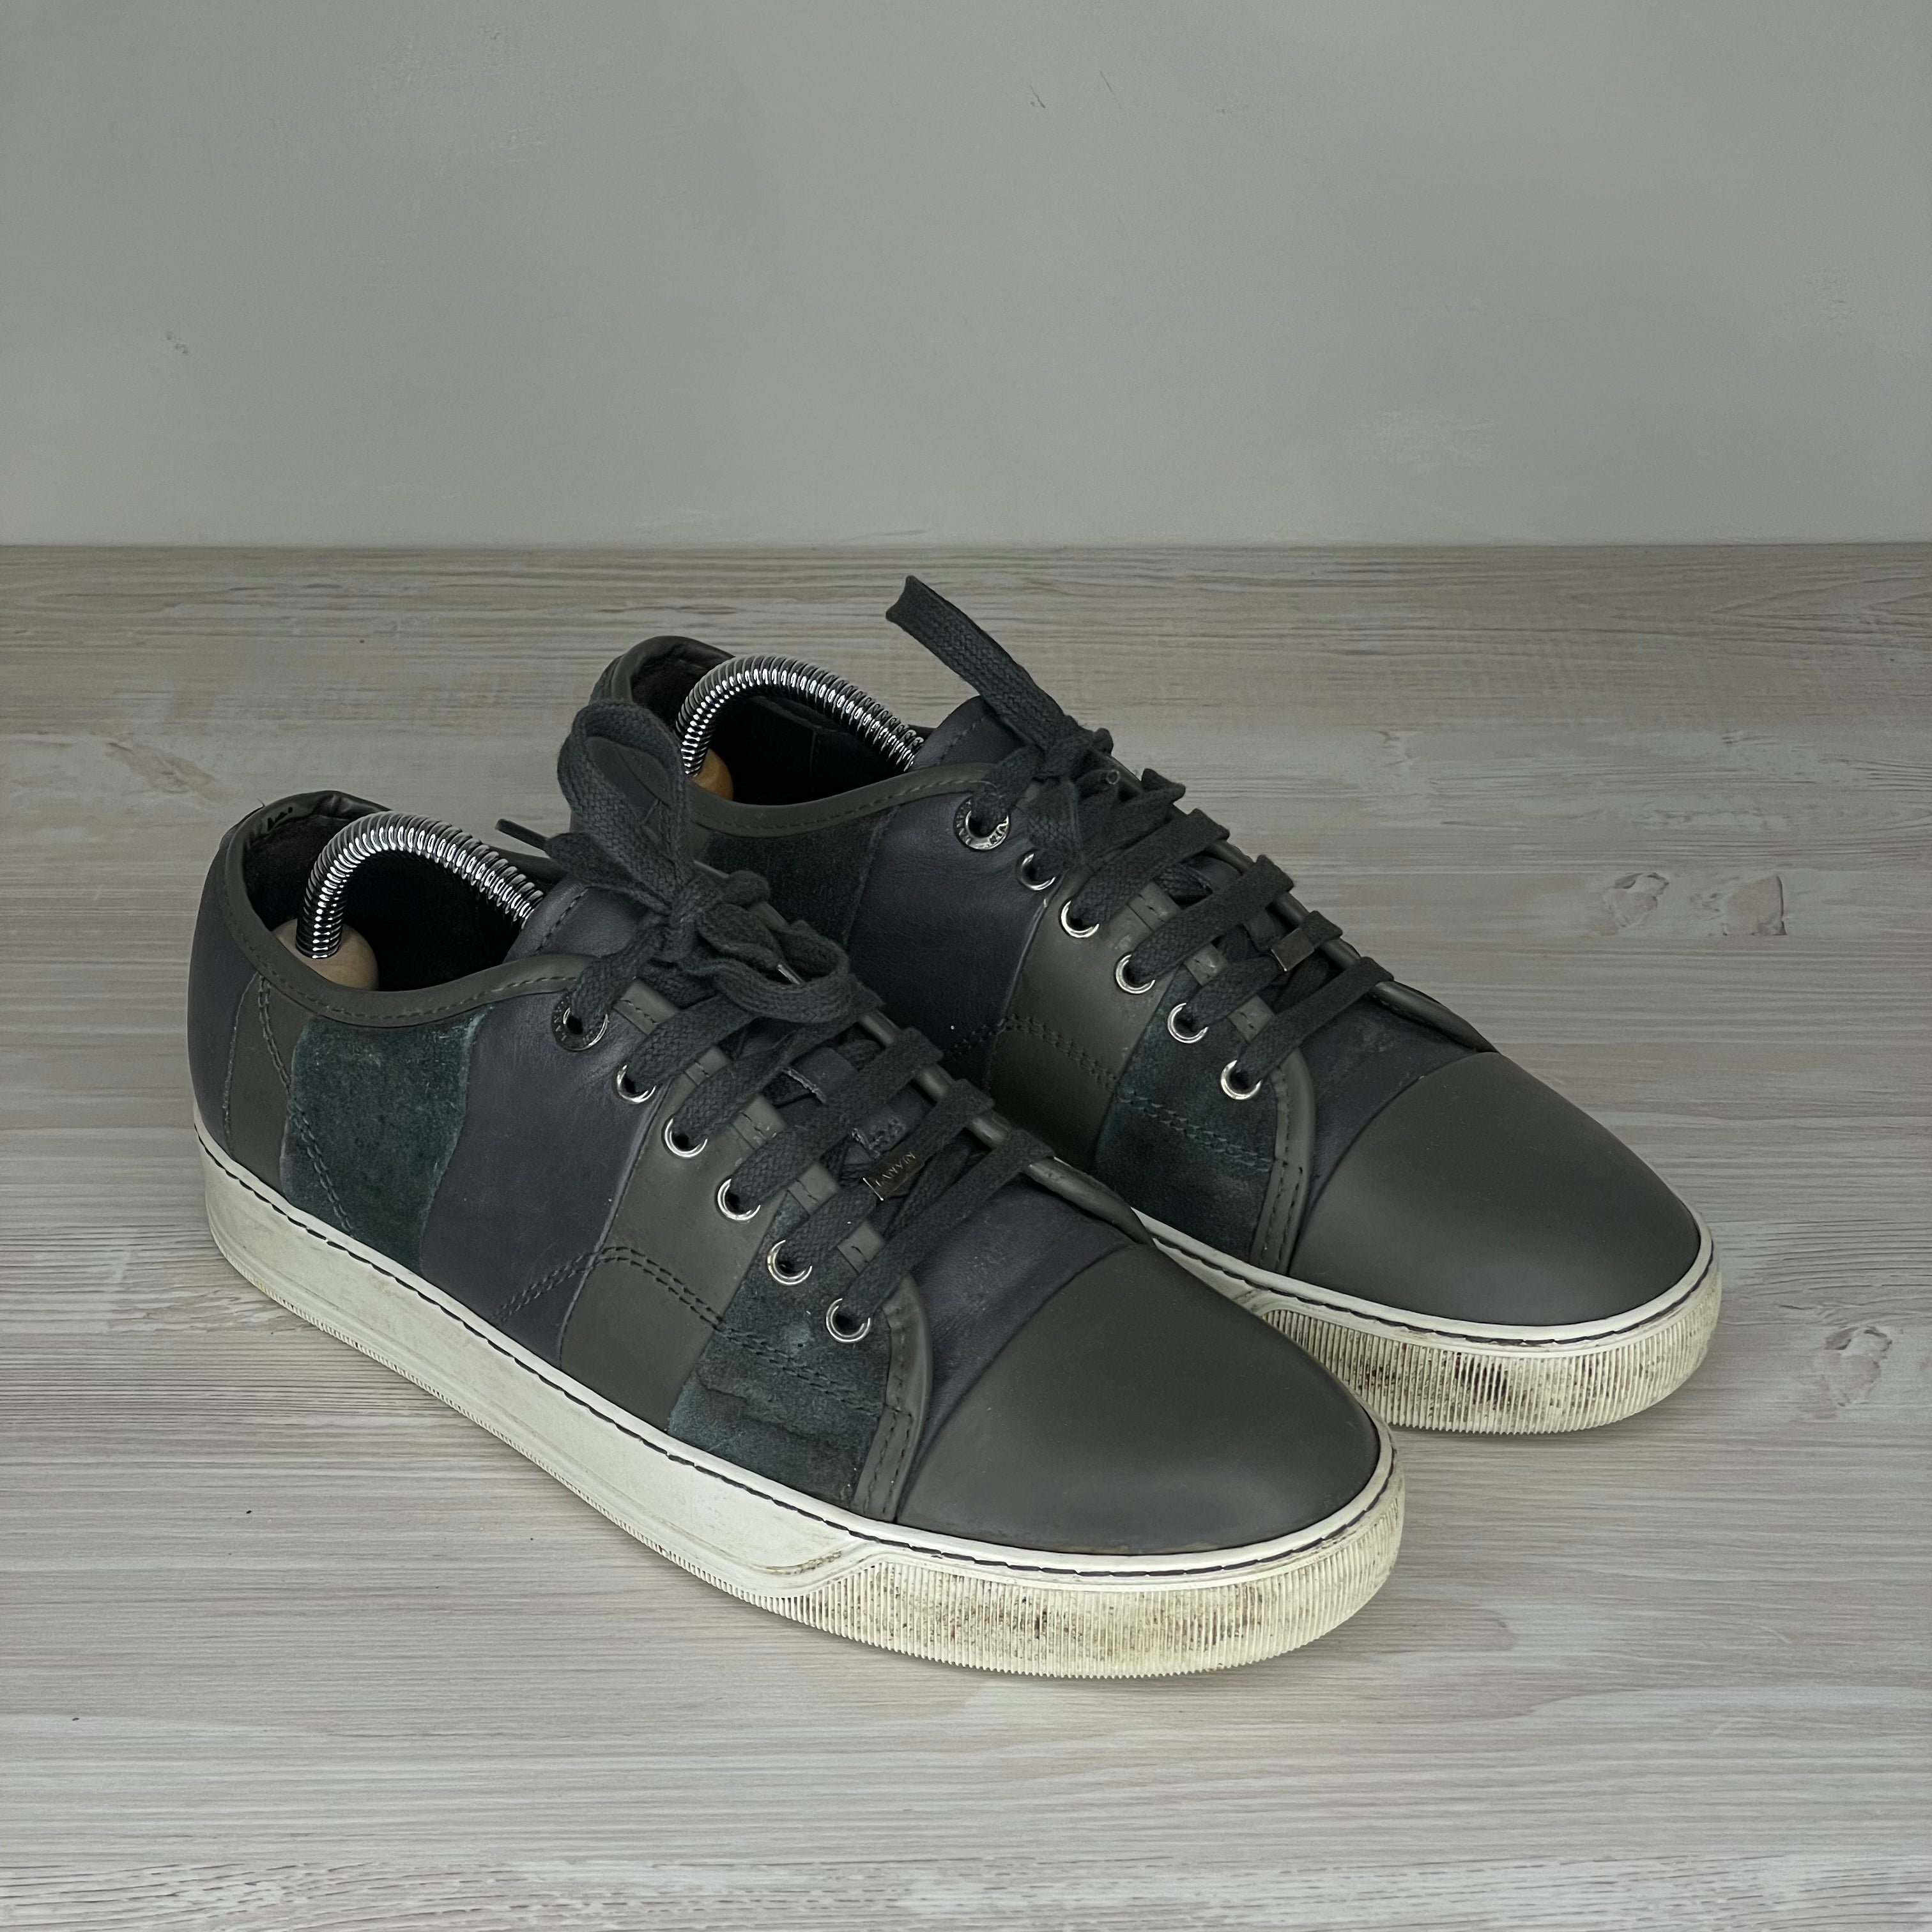 Lanvin Sneakers, 'Army Green Suede' Mat Toe (39)